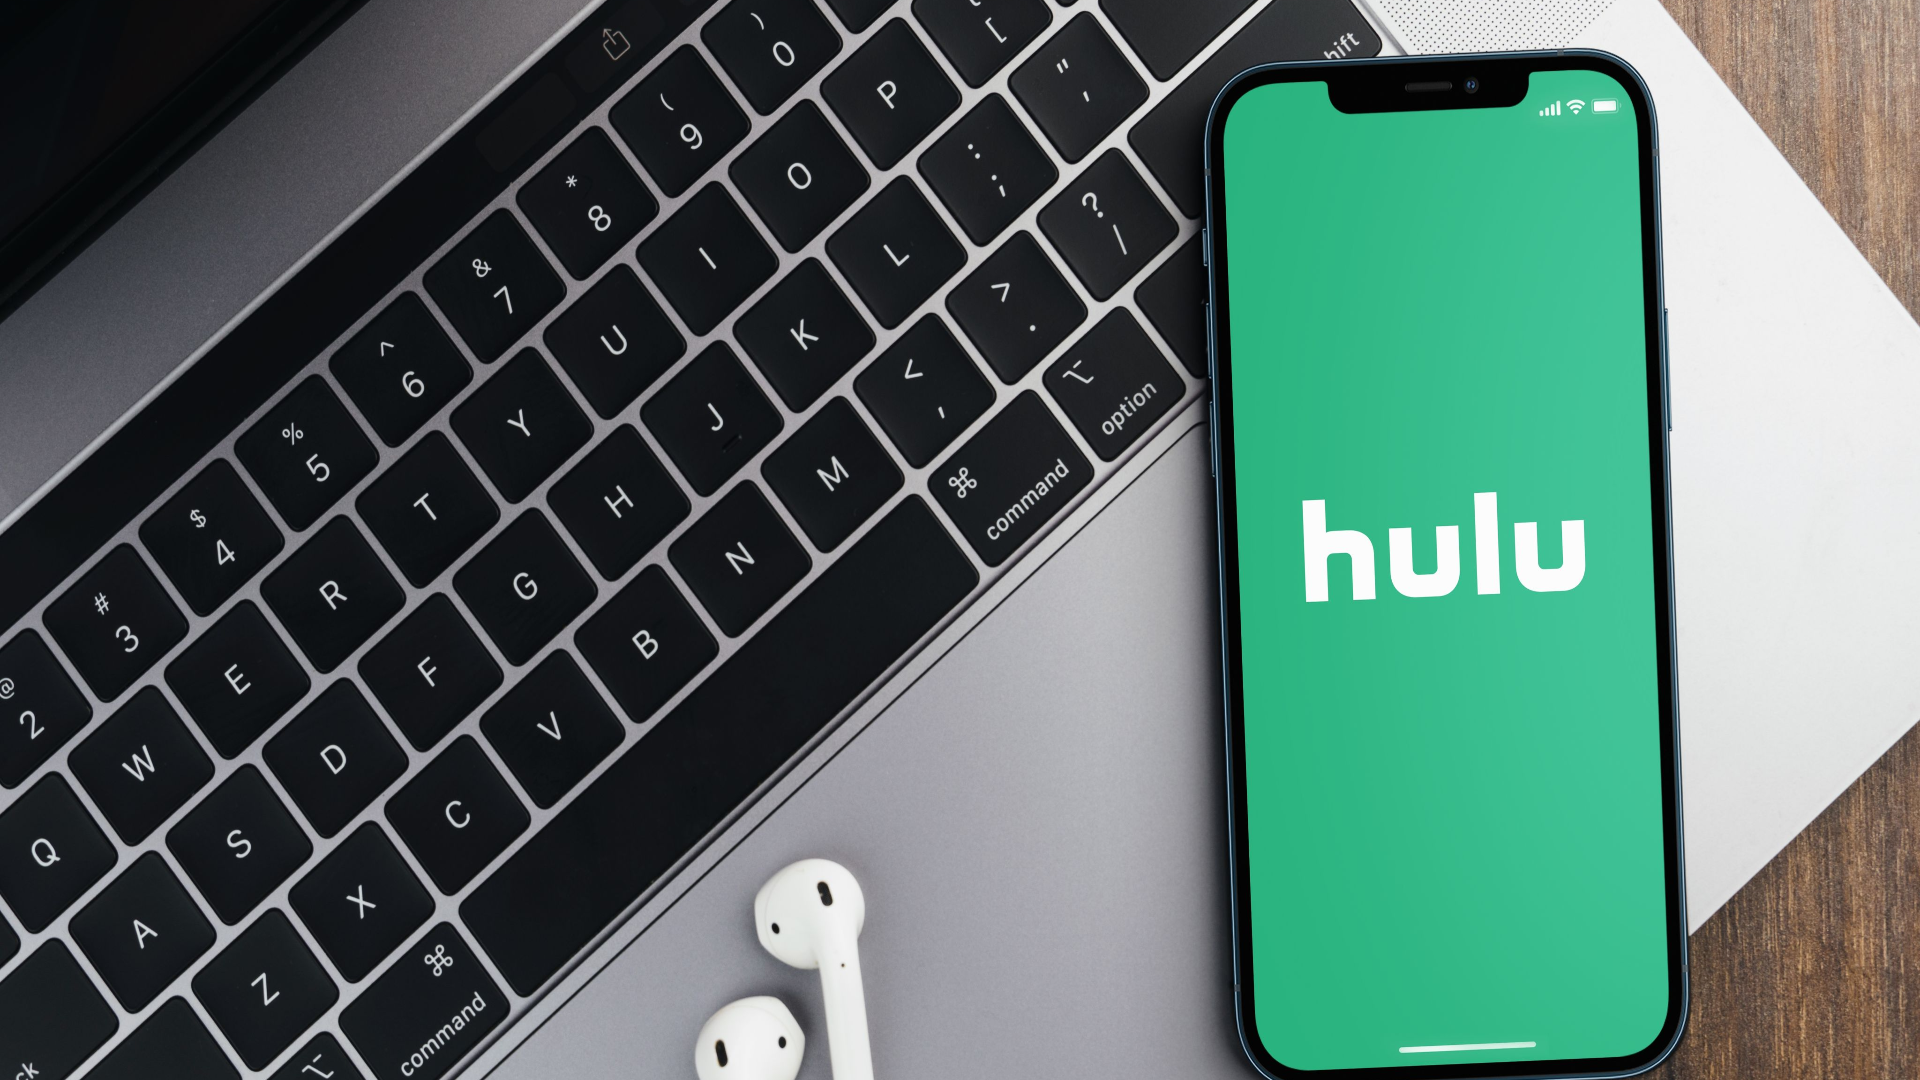 Hulu app on the smartphone screen on wooden background with a computer beside it. Top view.